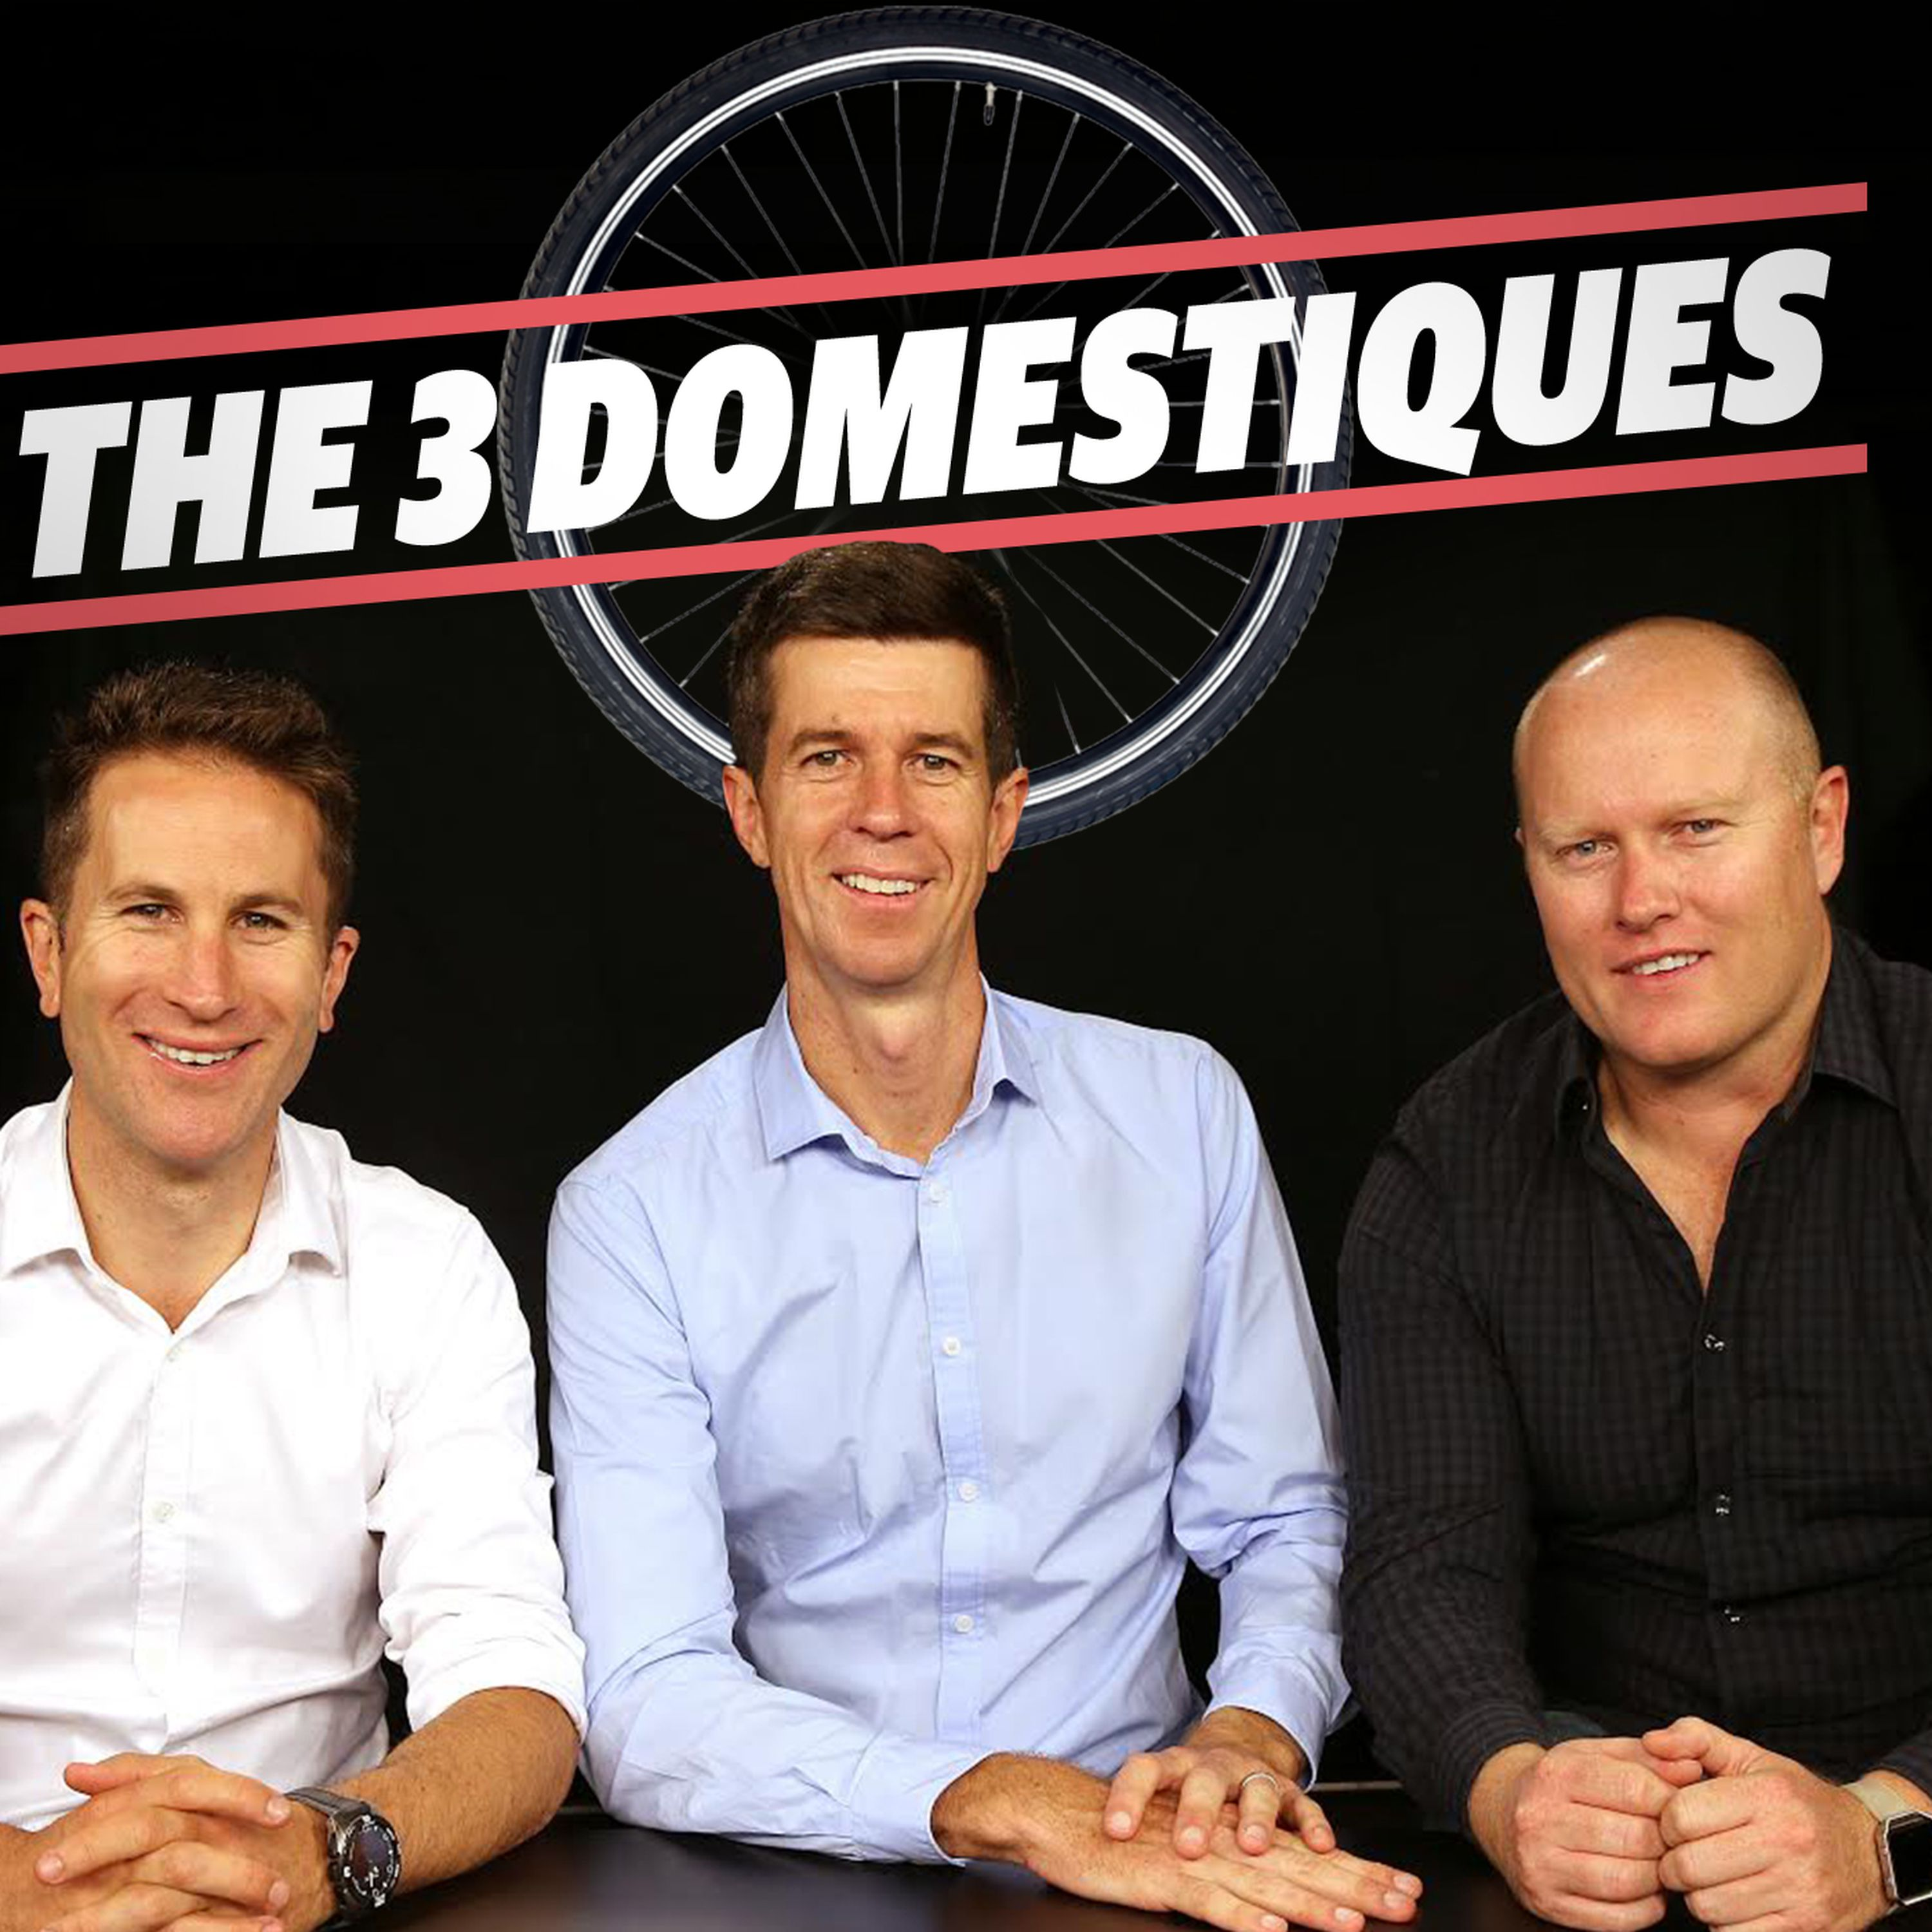 Episode 19: Season final. The Other Guy X2, TDF review, Vuelta preview & everything in between.